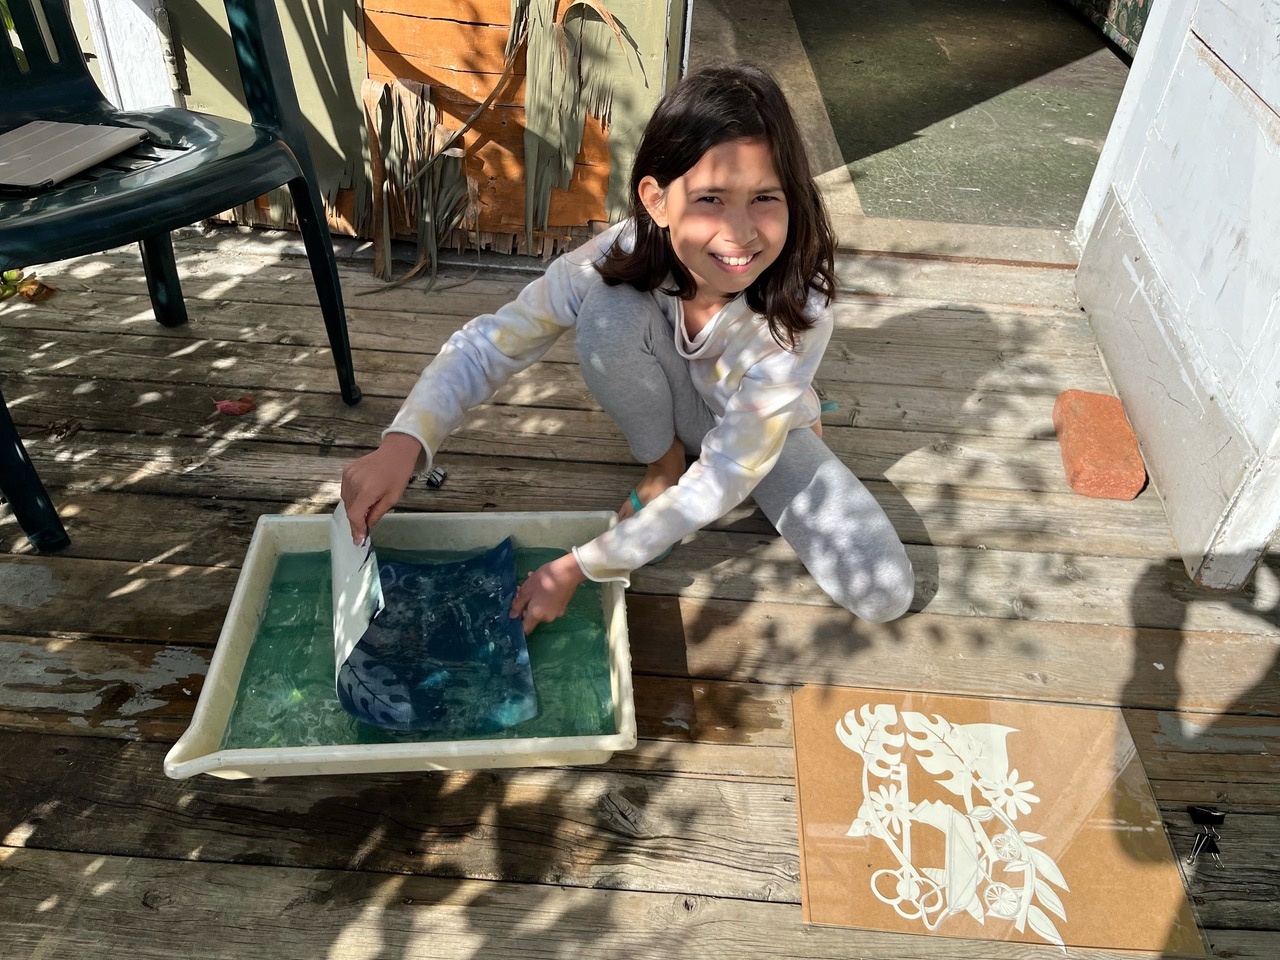 Parents and kids - Cyanotypes on Granville Island | A Saturday in August-1